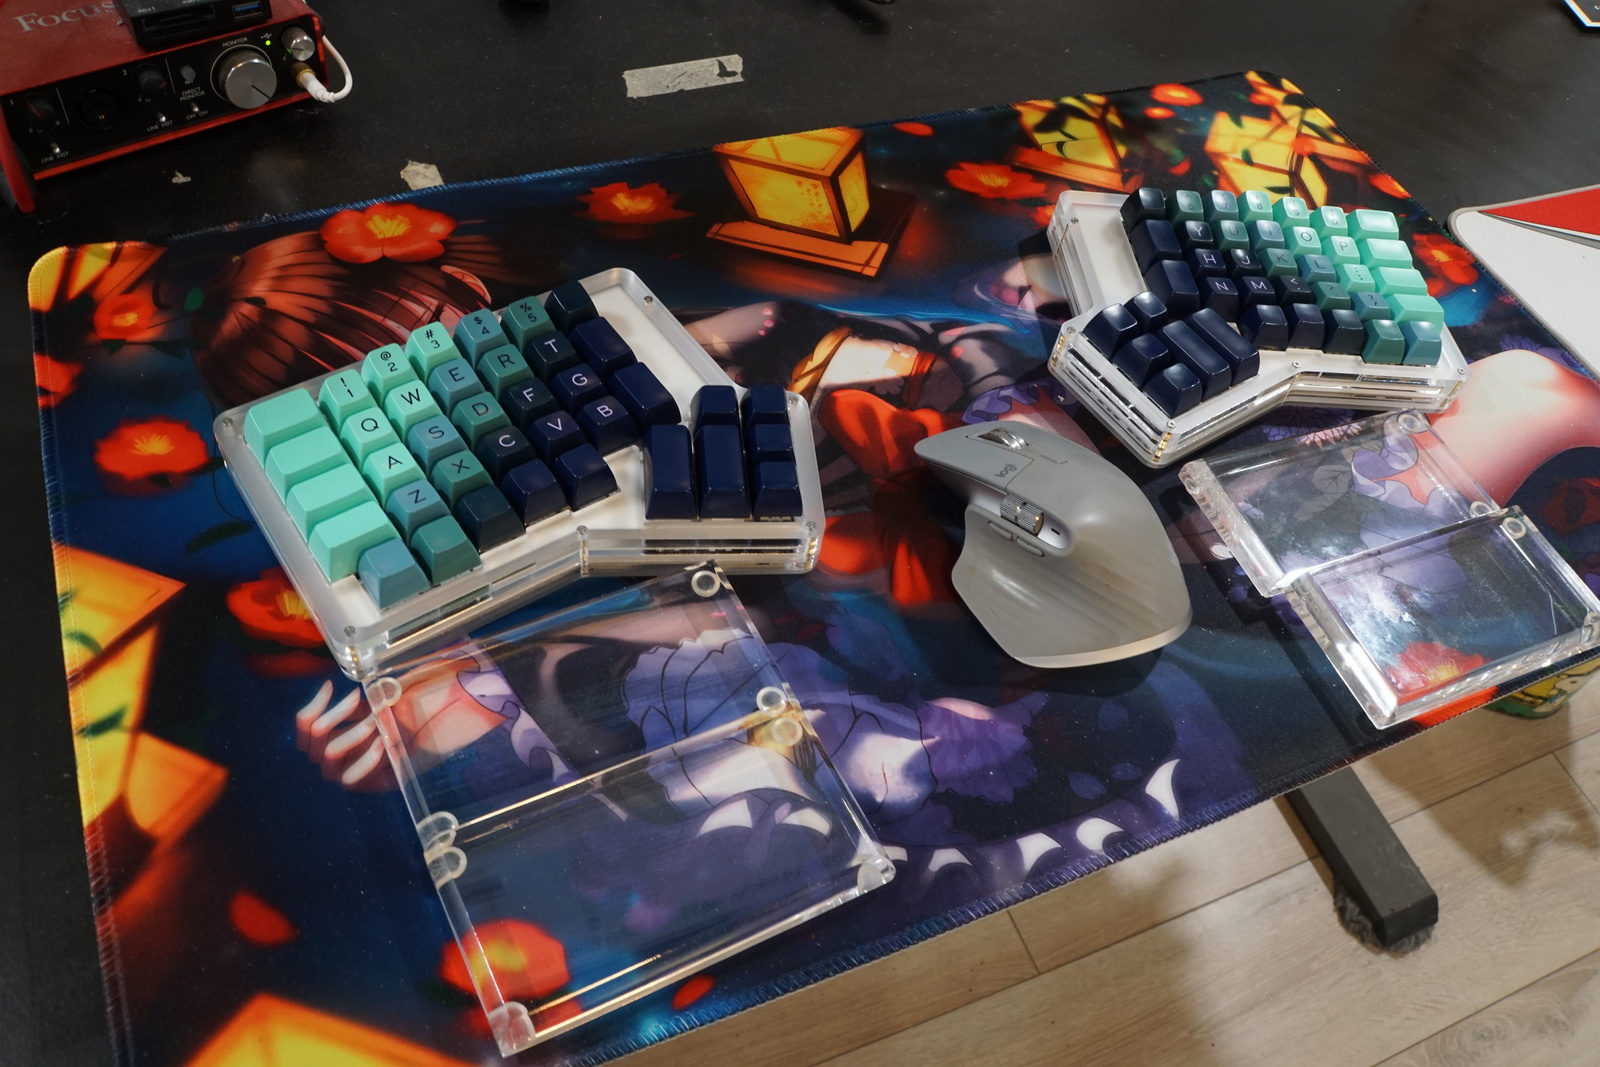 W-Ergo Keyboard fully assembled with keycaps, wrist rests and mouse on a deskmat